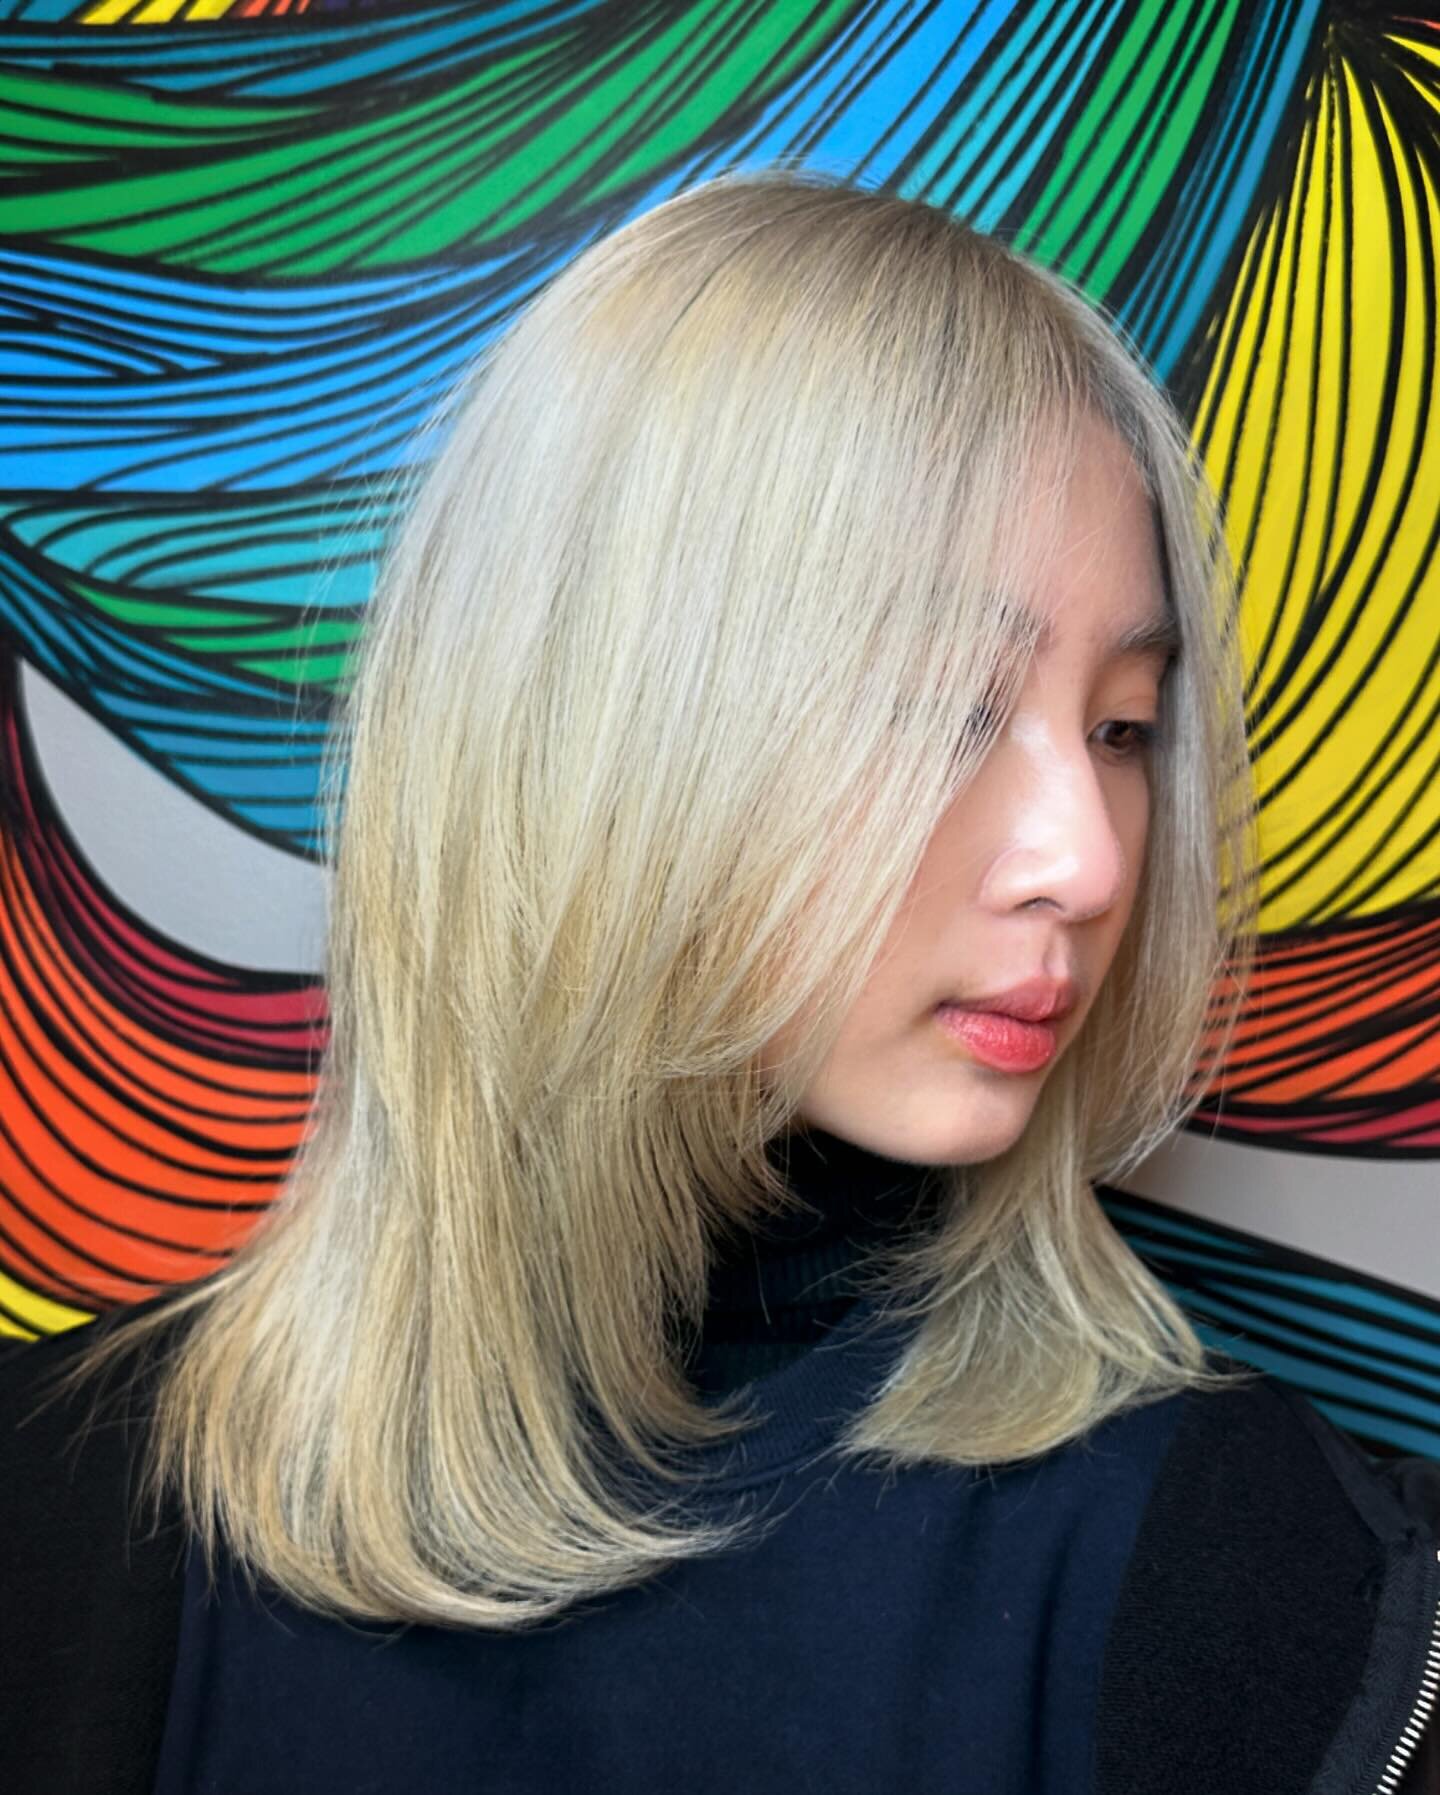 10 strands of hair were sacrificed during this amazing transformation! 🥰🙏❤️ Simply OBSESSED with this blonde HAIR! ✨👀 @chuuchuu_tram 

Color by @_itsagingerthing @thehaircraftsman 

#adelaidehairsalon #blowitsahairthing #adelaide #hairsalon #adela